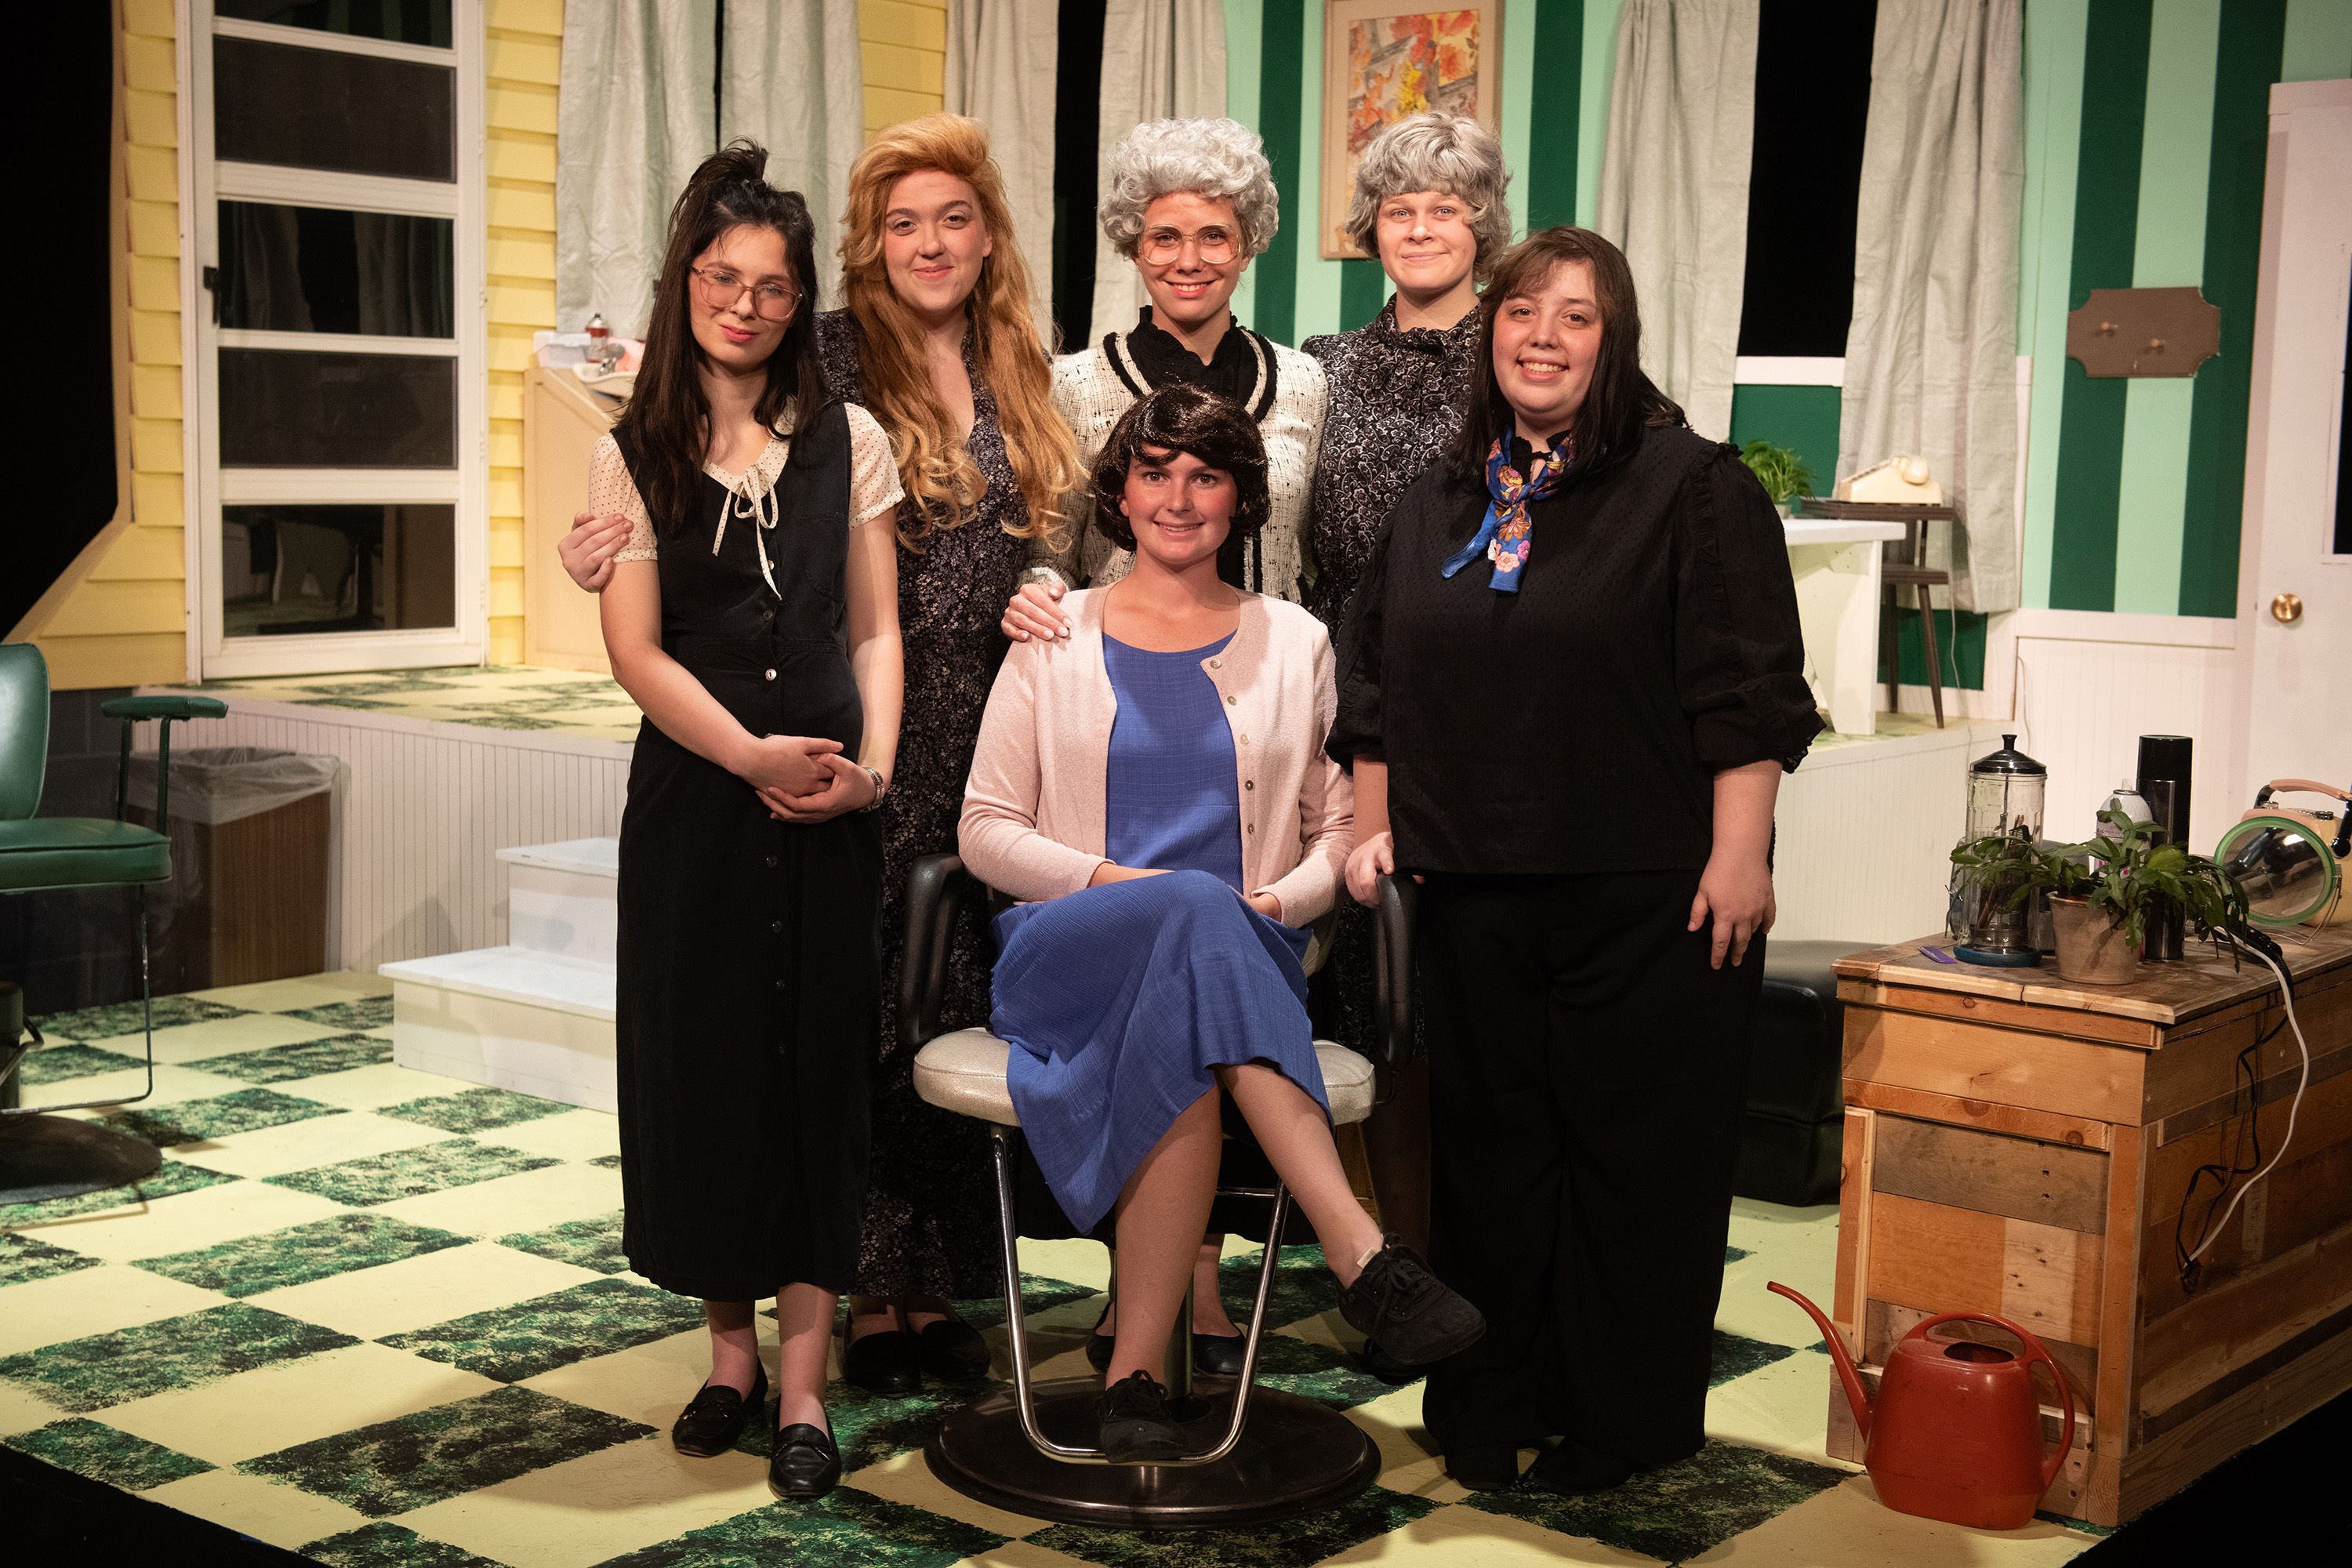 cast photo from Hesston College Theatre fall 2023 show "Steel Magnolias"